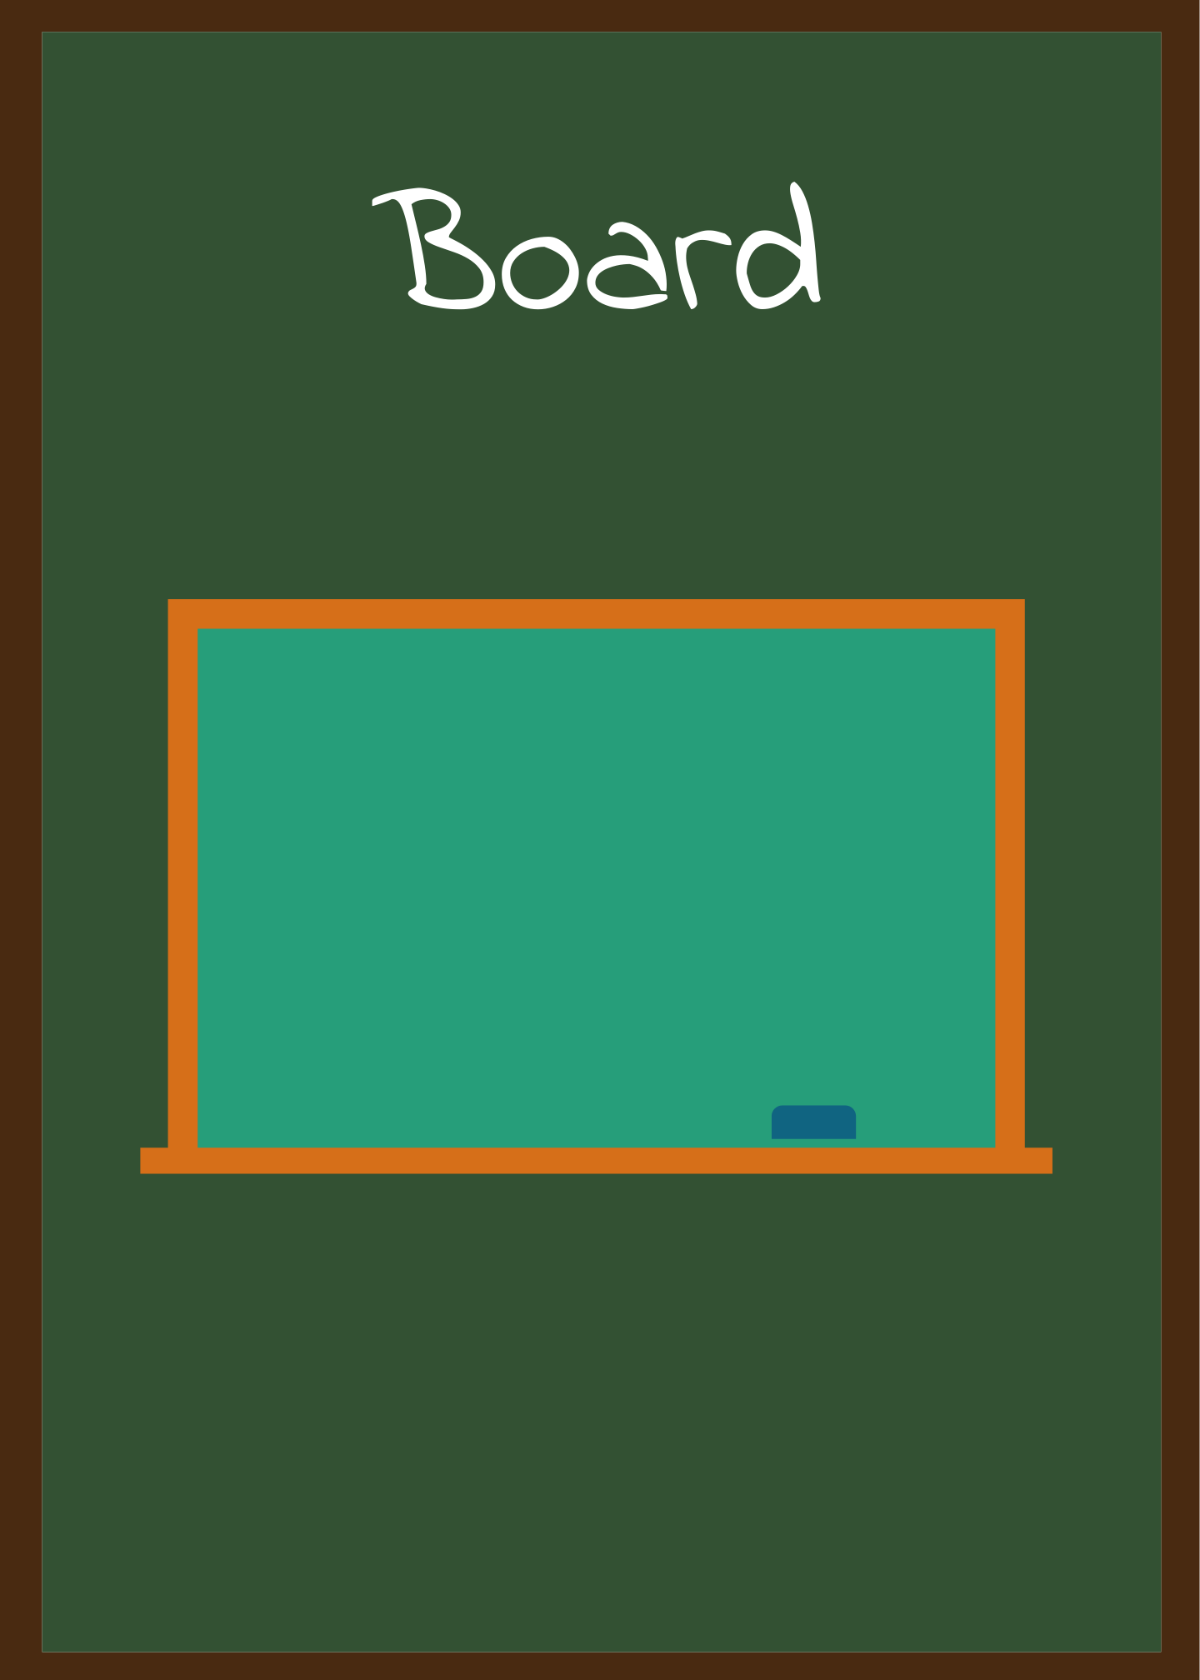 Free Classroom Objects Flashcards Template